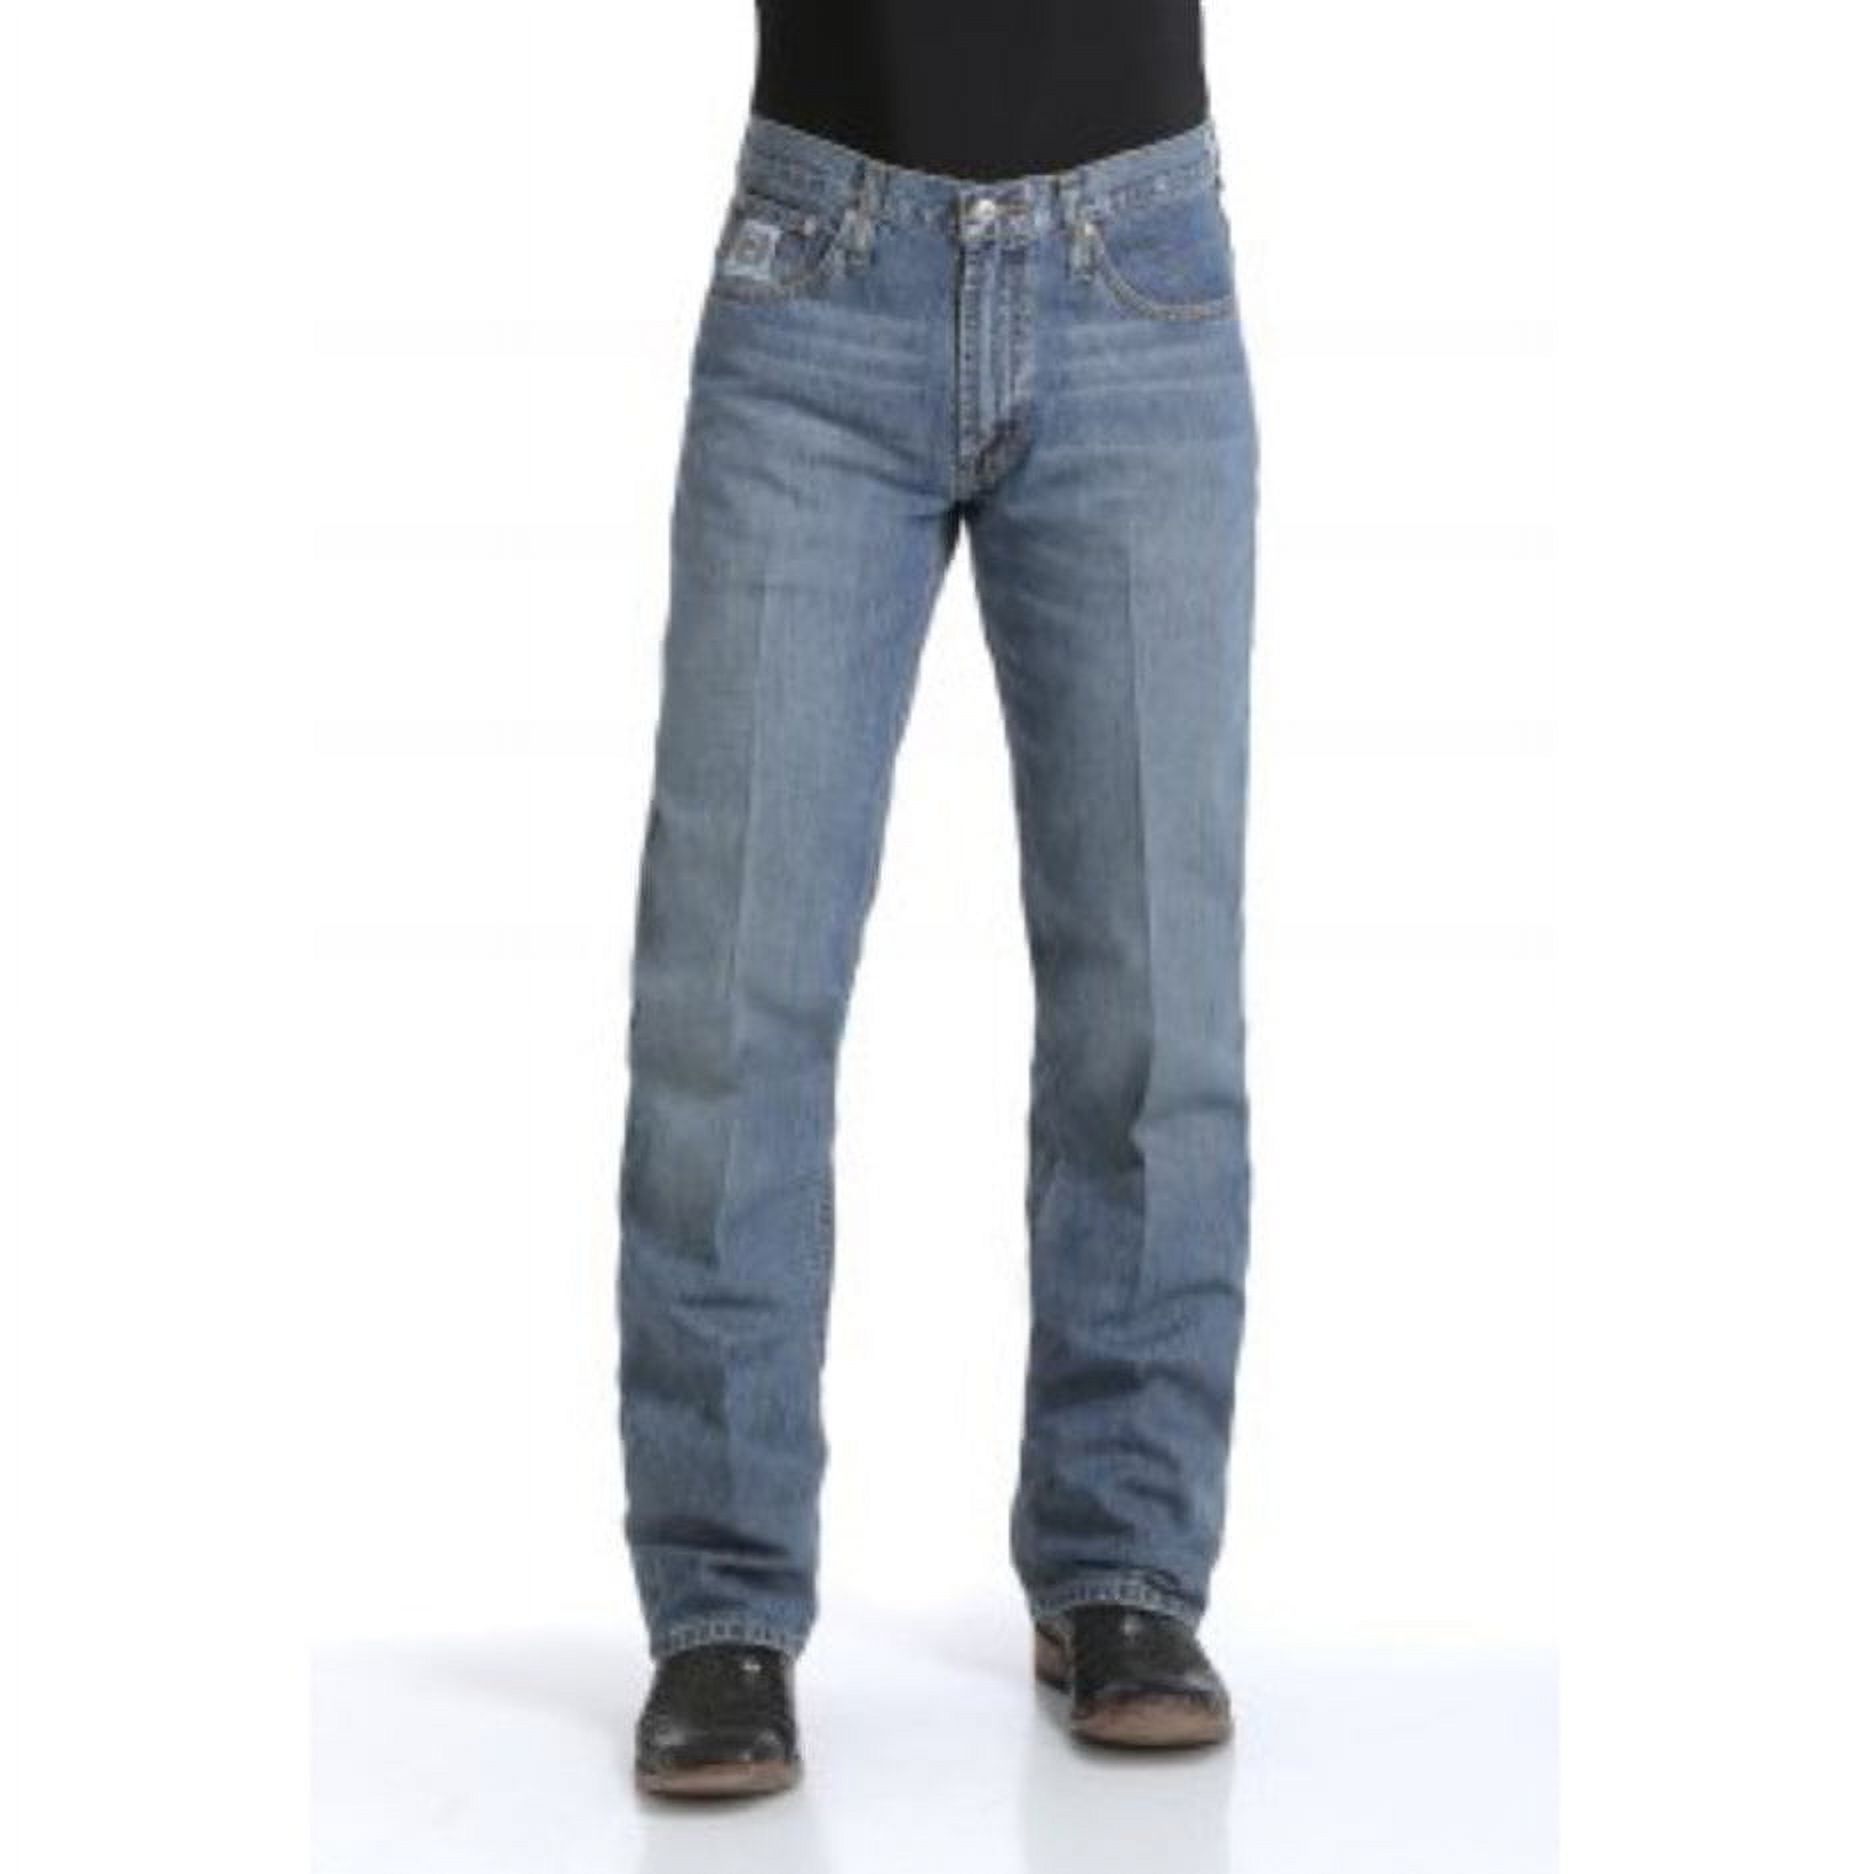 Cinch Men's Jeans White Label Relaxed Fit Medium Stonewash Light Stone 36W x 36L  US - image 3 of 4